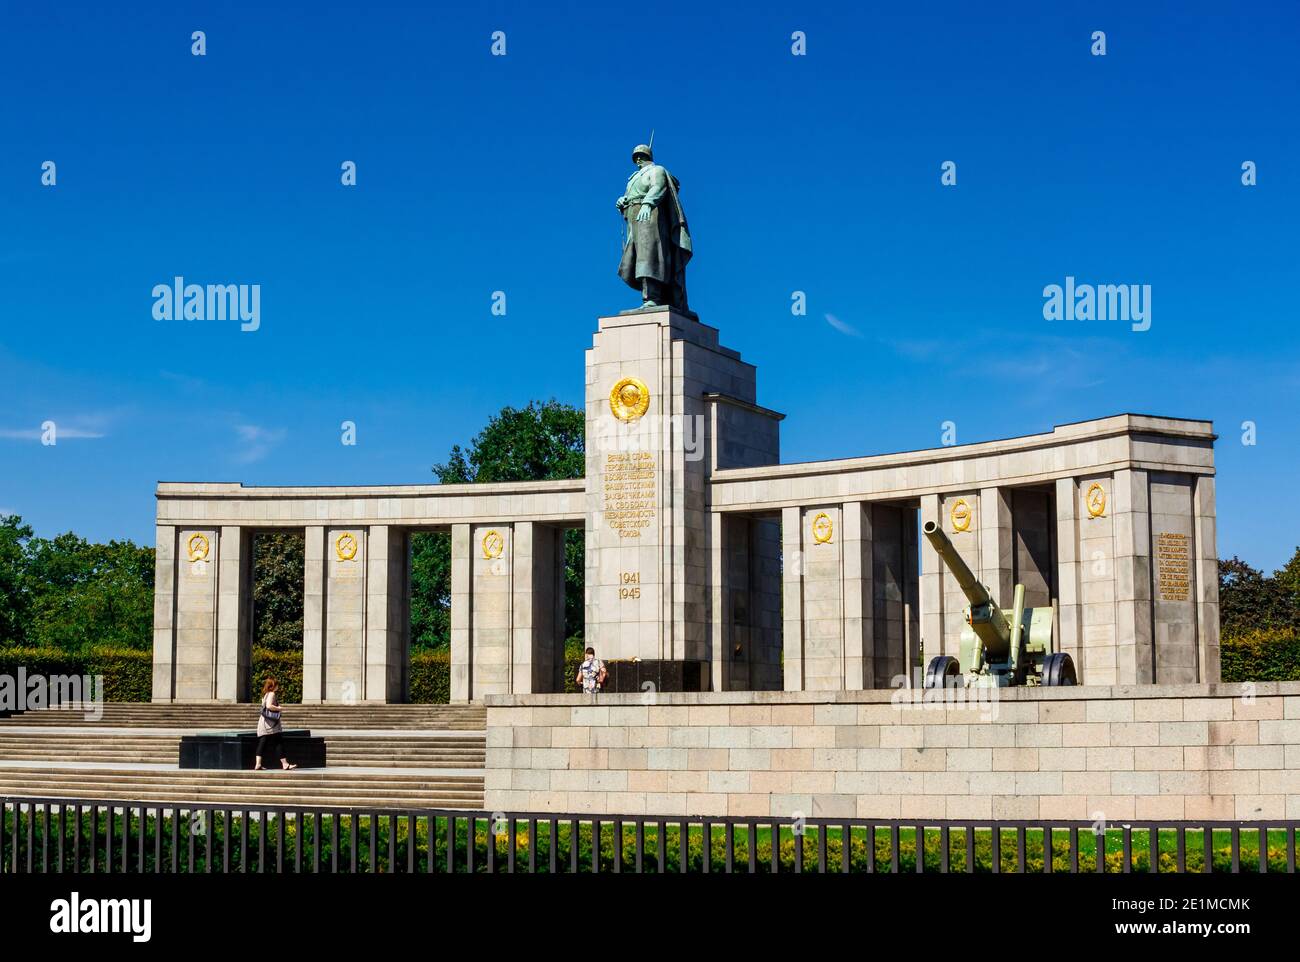 Berlin, Germany - 22 August 2011: The Soviet War Memorial (Tiergarten) was erected in 1945, within a few months of the capture of the city. Stock Photo